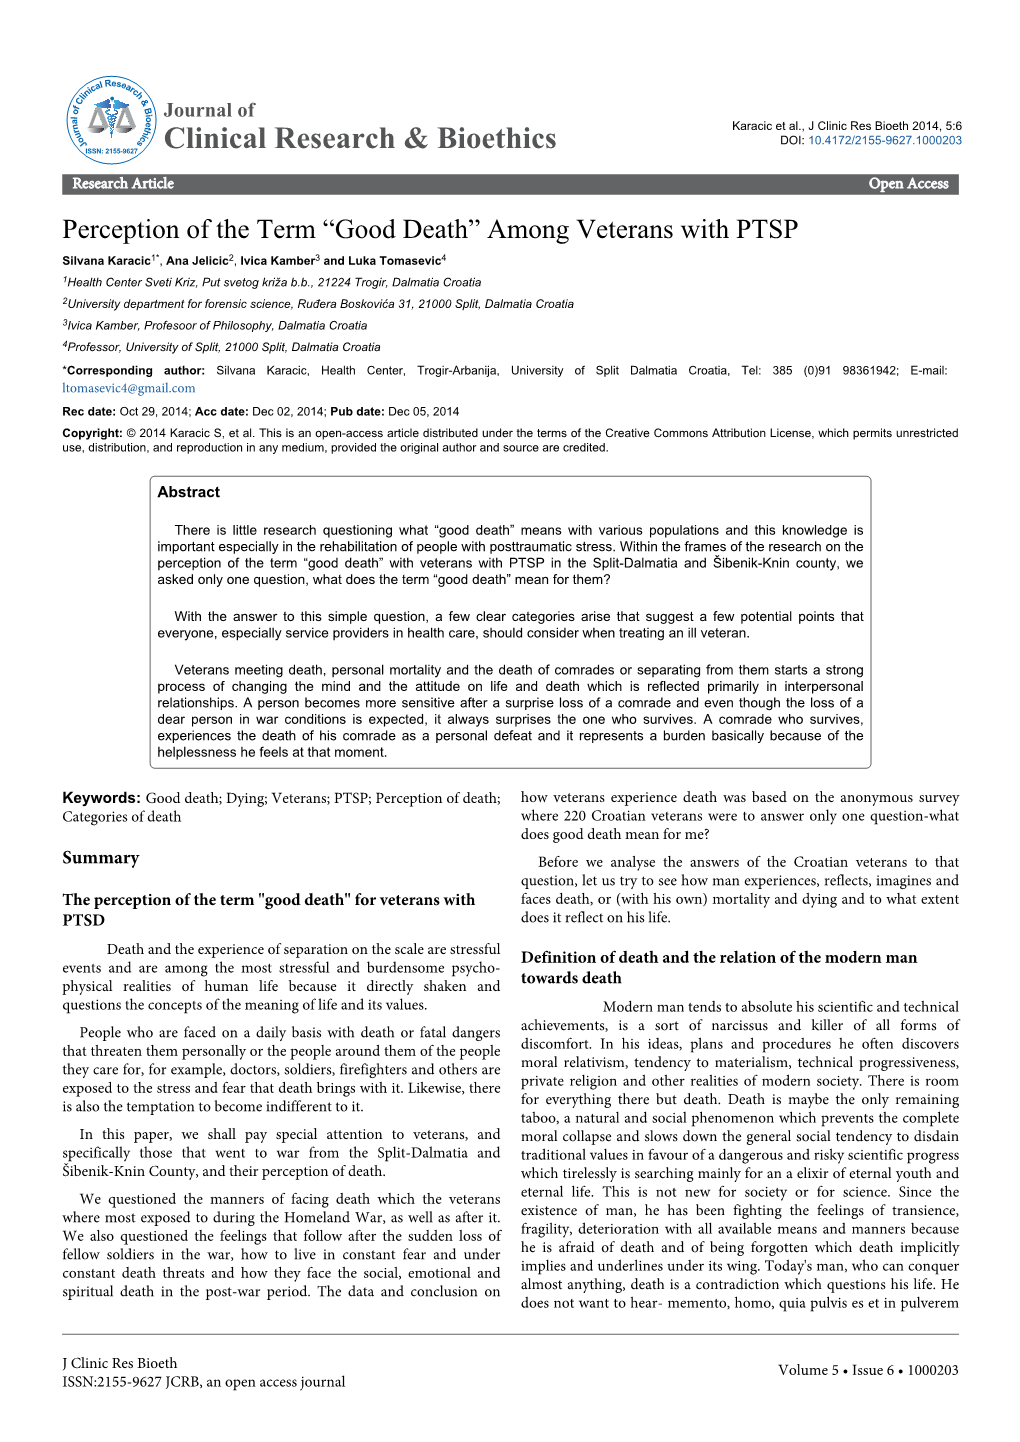 Perception of the Term “Good Death” Among Veterans with PTSP